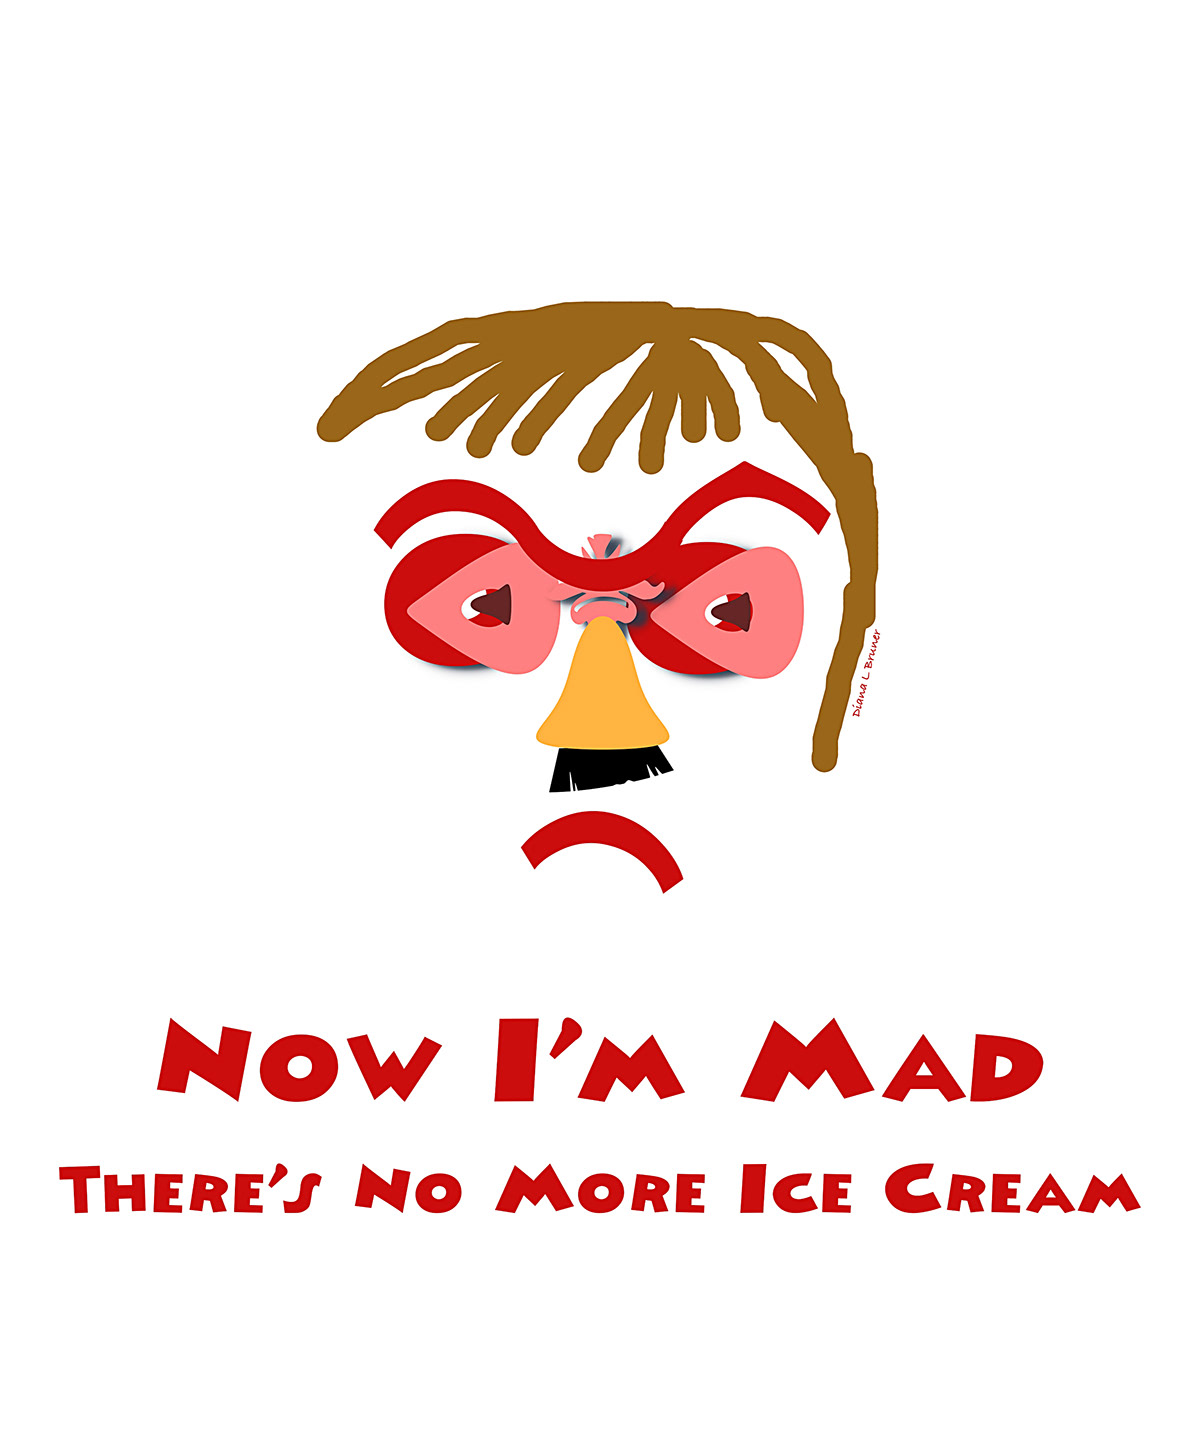 Anger Mad disappointed face of anger red frown wrinkled brow ILLUSTRATION  ice cream LACK